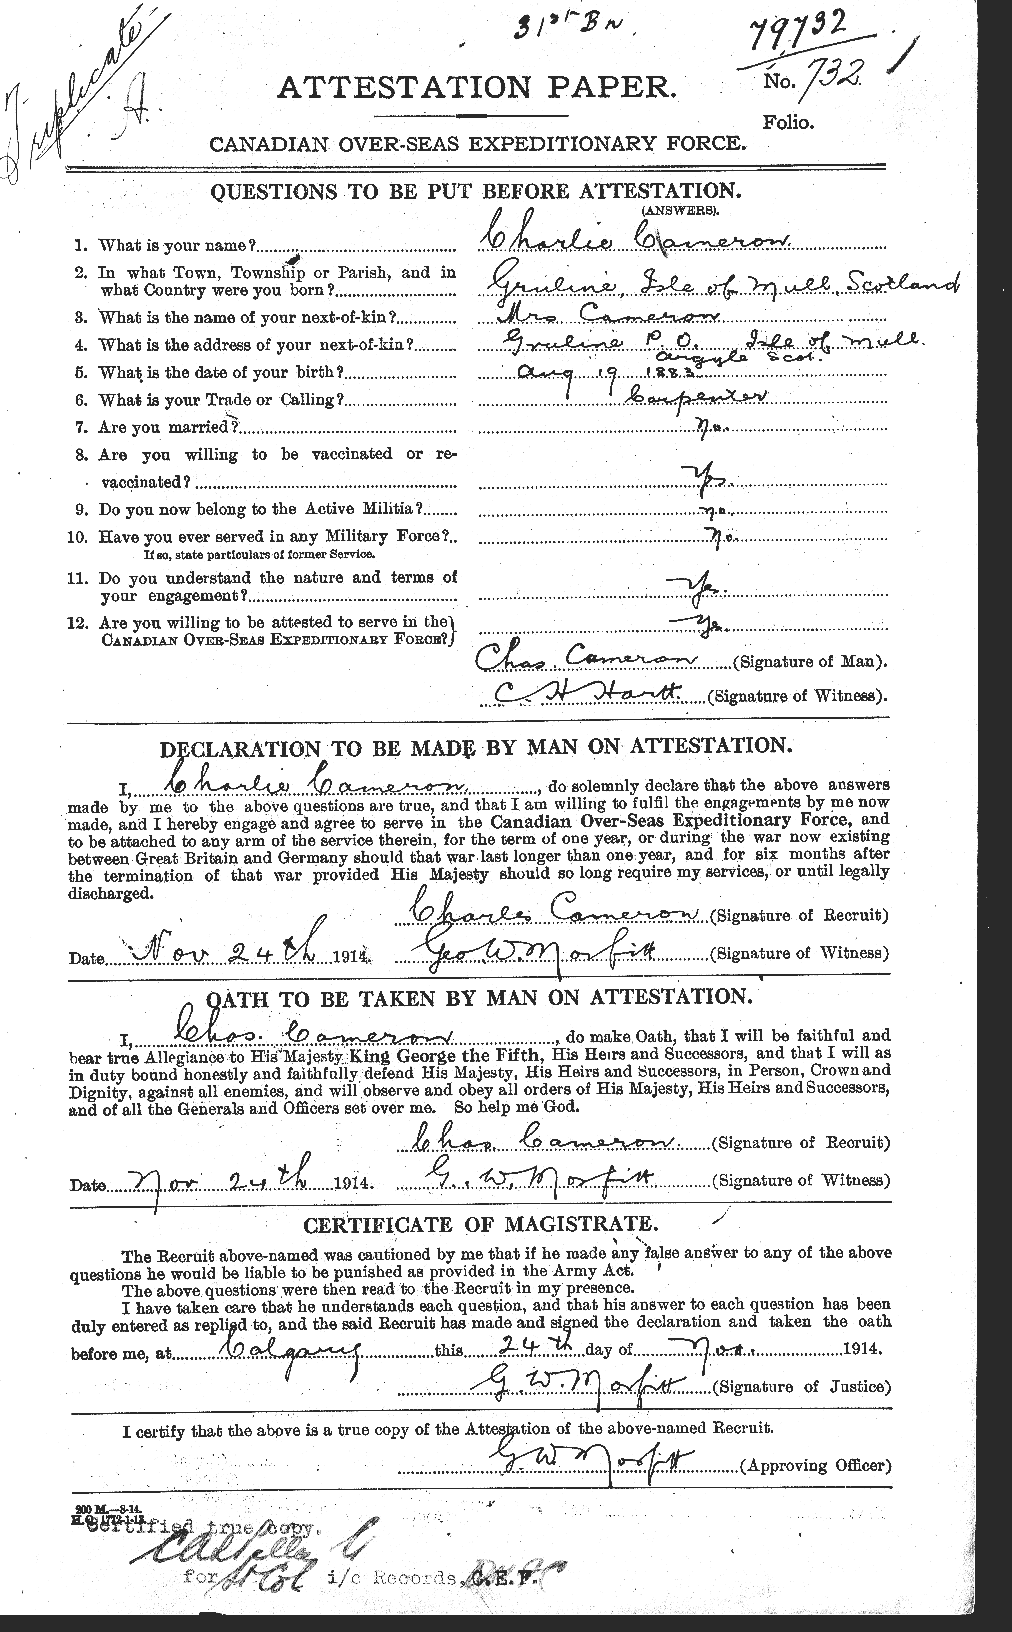 Personnel Records of the First World War - CEF 002590a